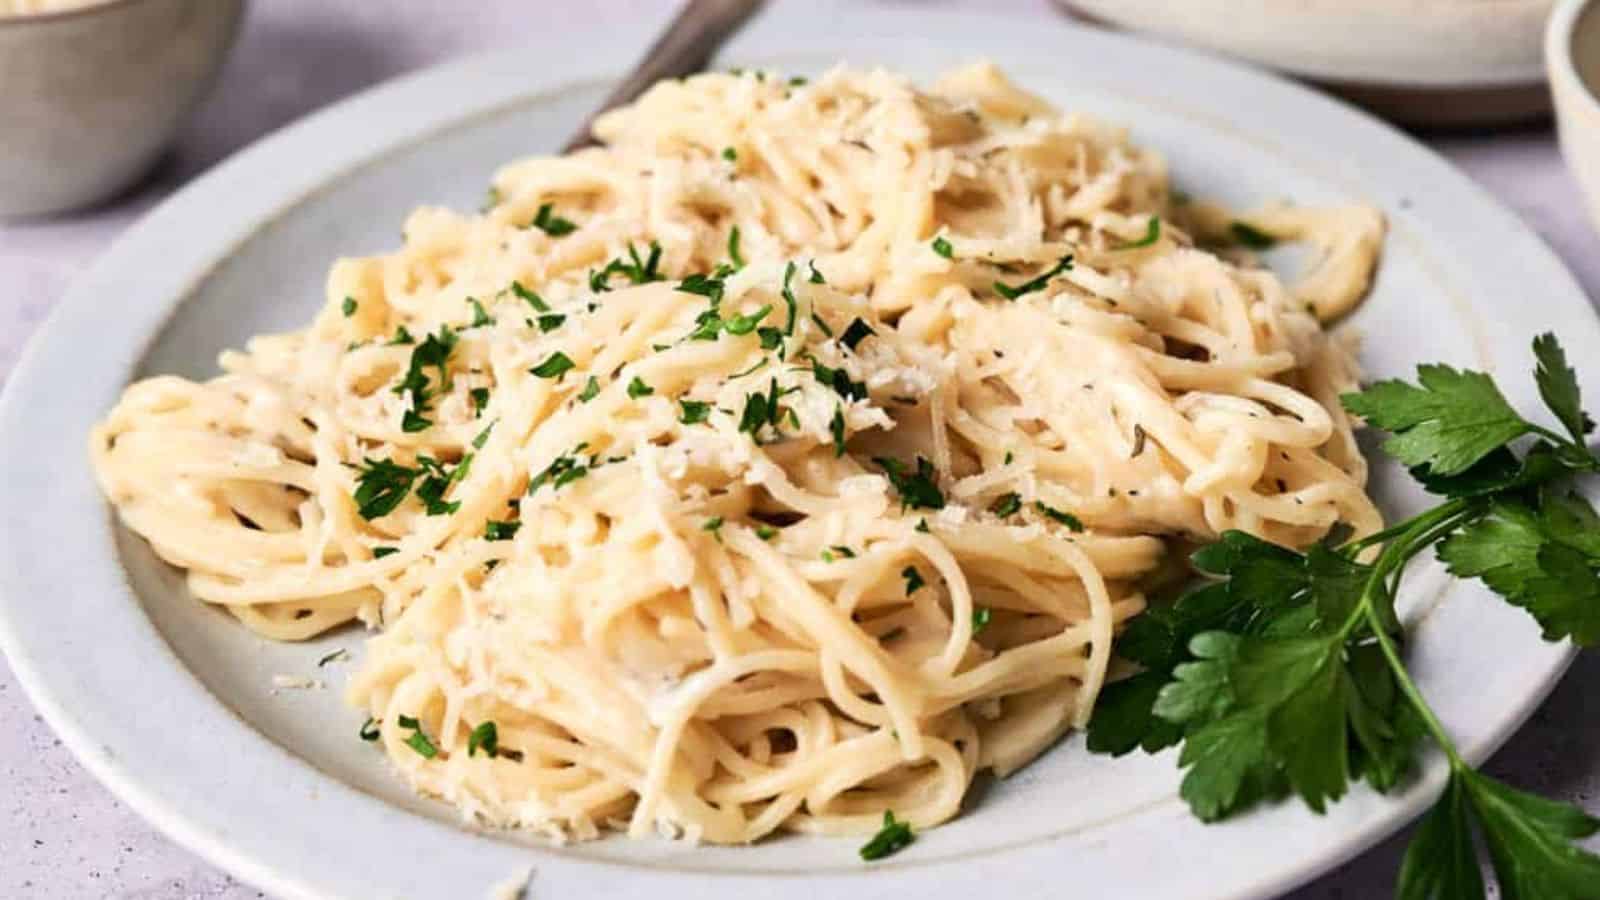 A plate of creamy fettuccine alfredo garnished with chopped parsley, served on a light-colored plate.